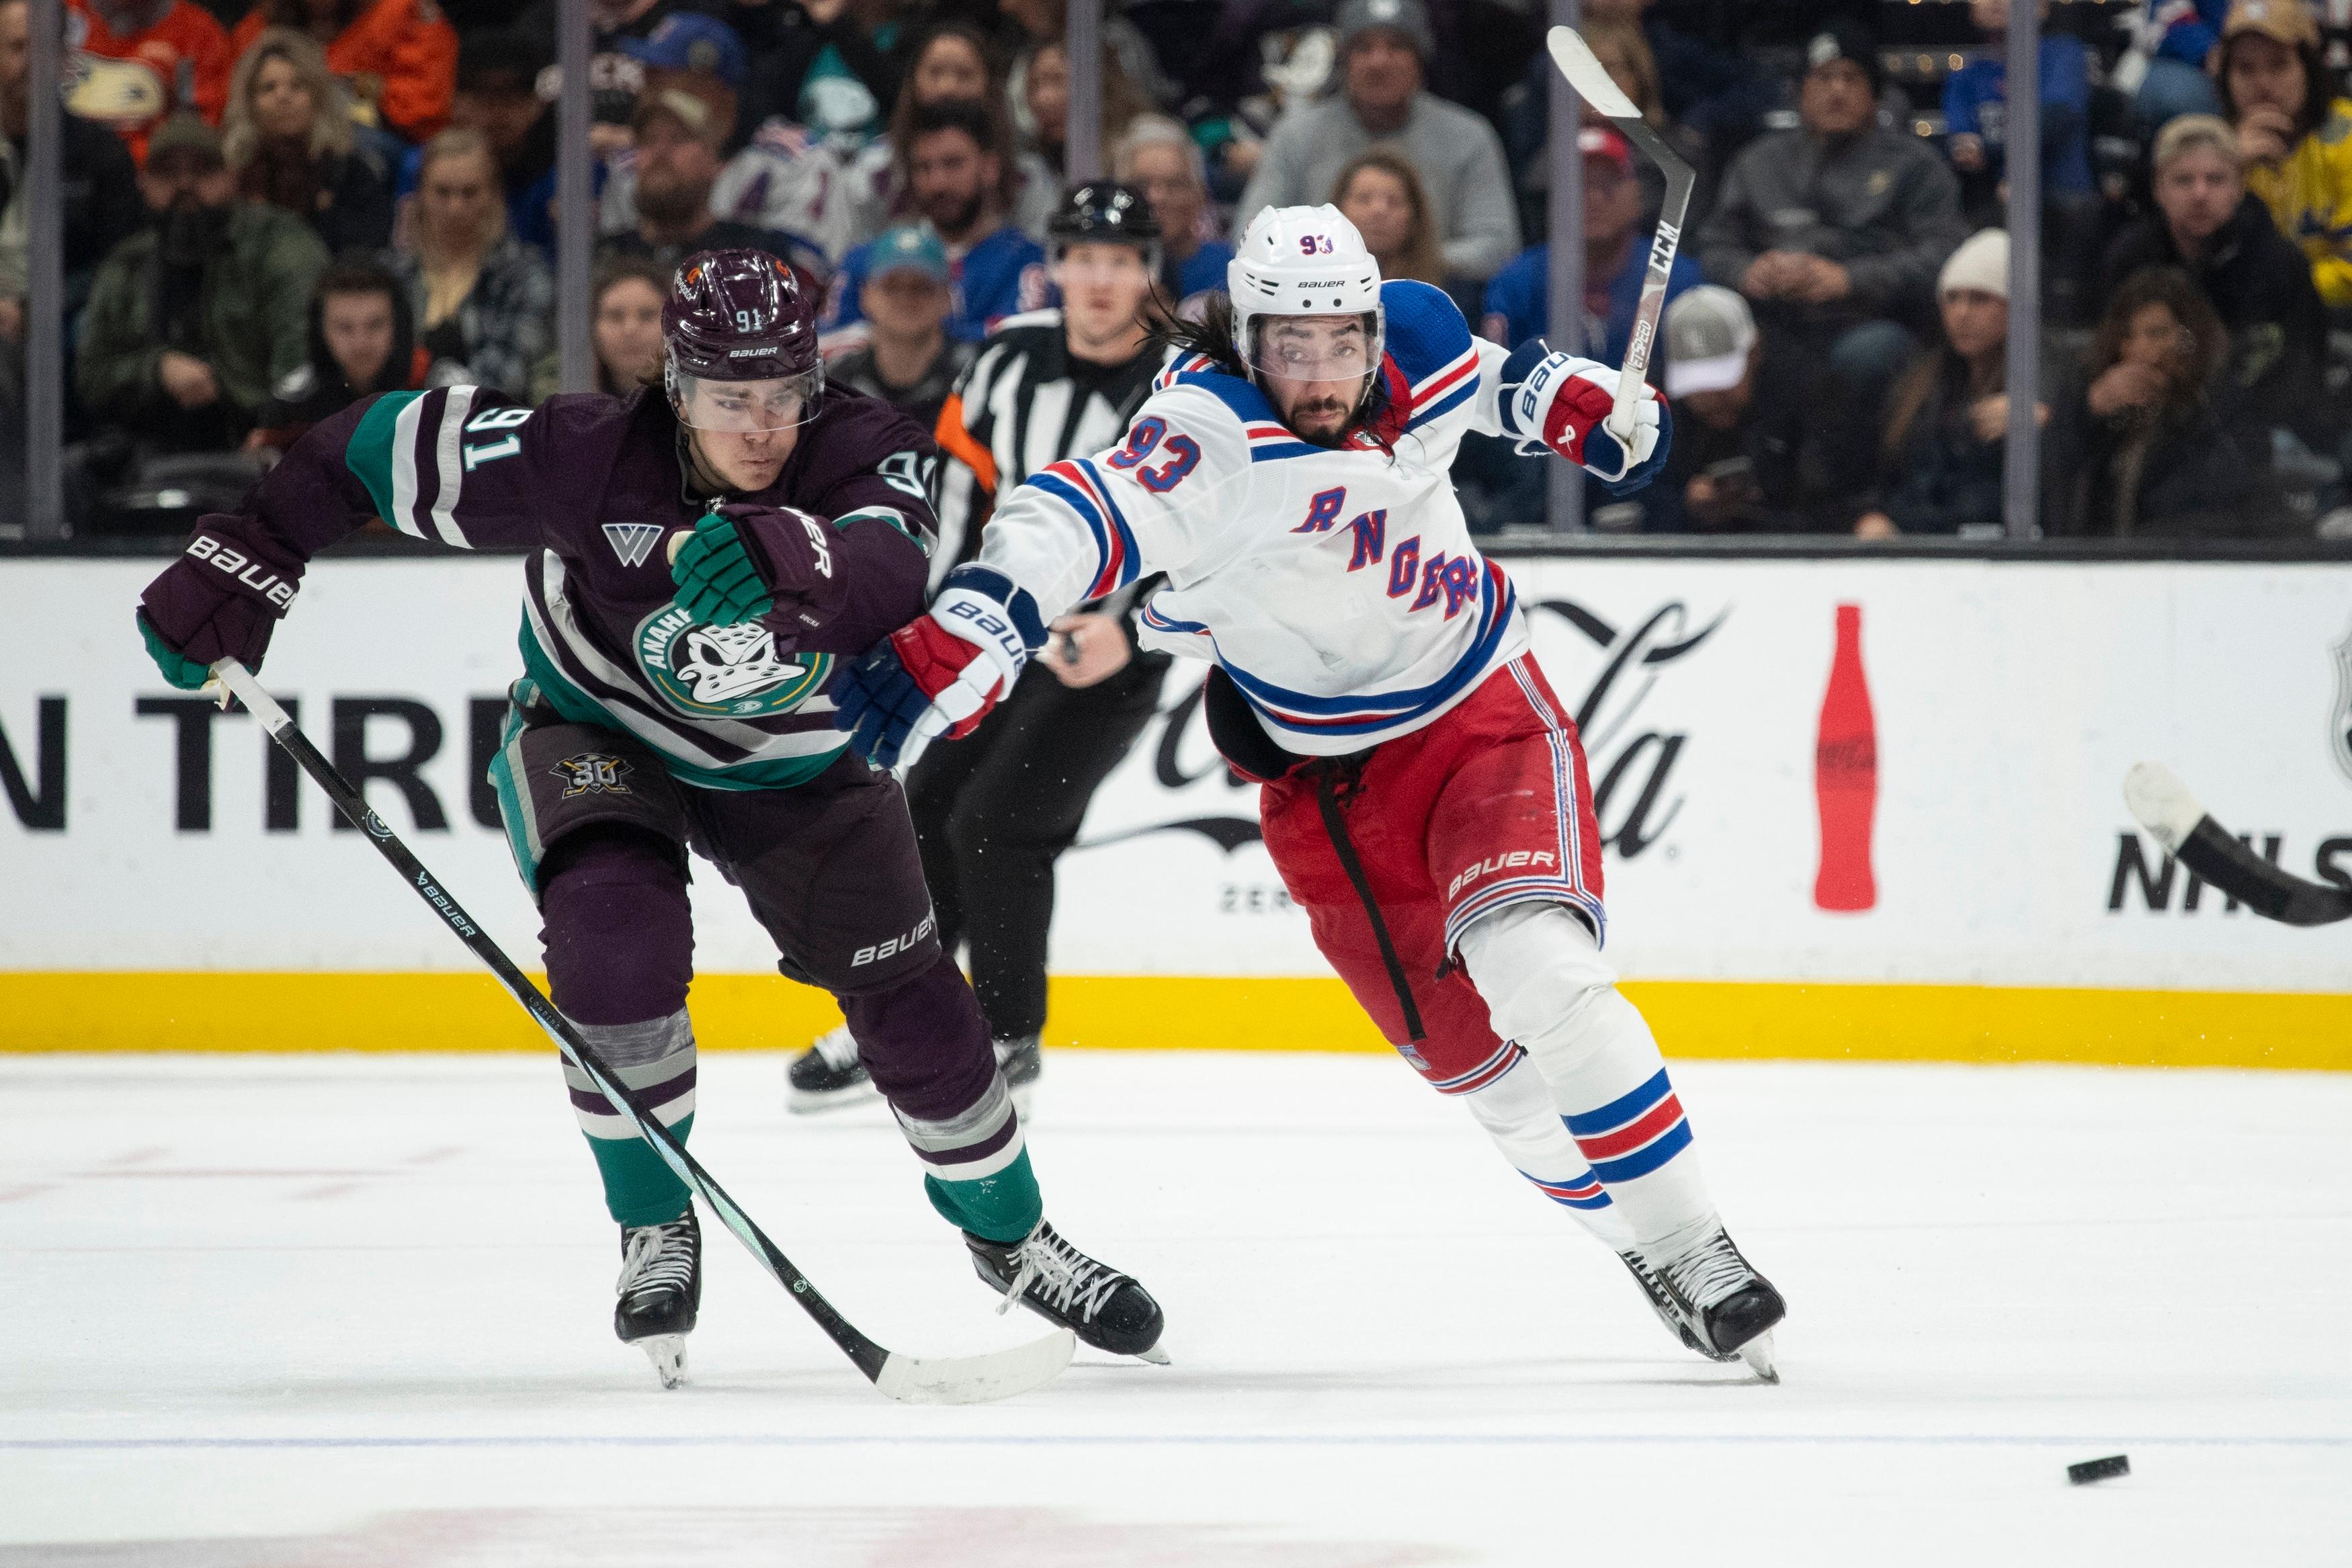 Panarin Scores Go-ahead Goal as Rangers Rally in the Third Period for 5–2 Victory Over Ducks